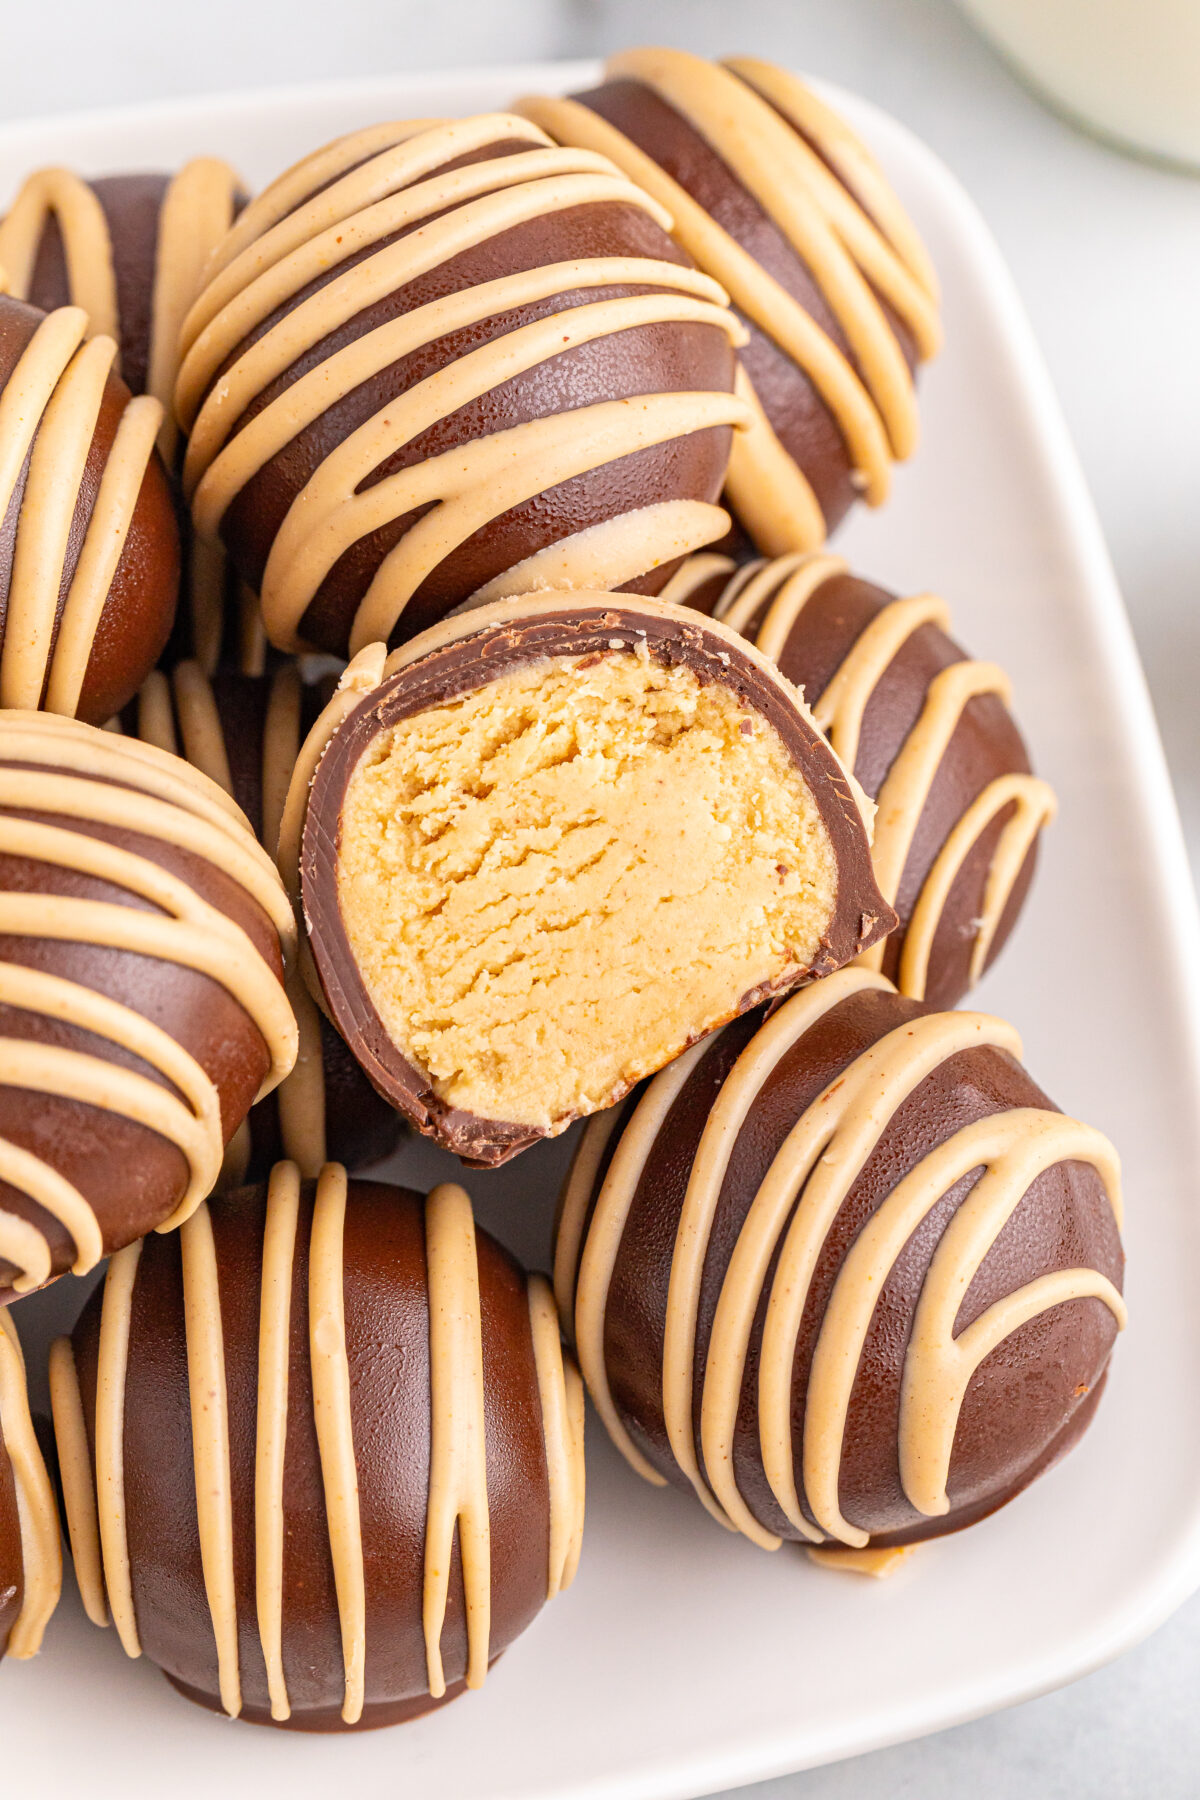 Indulge in the perfect combination of creamy peanut butter and rich chocolate with these irresistible chocolate covered peanut butter balls.